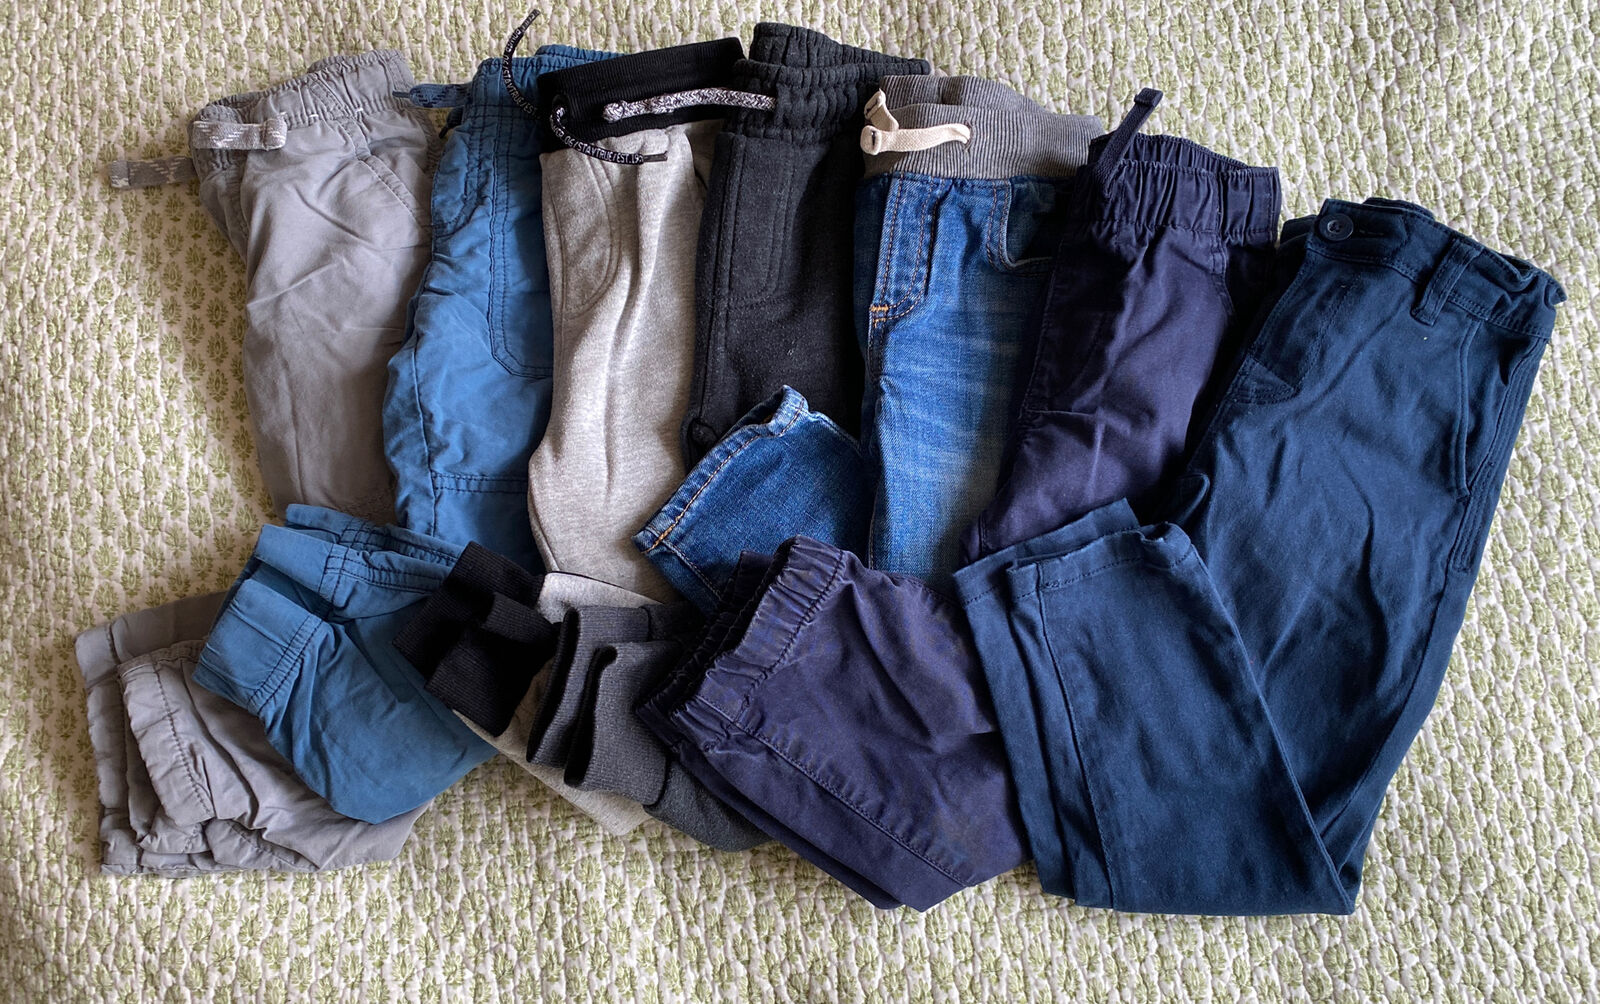 Bundle of Toddler Boy Long Pants 4T Gap Pairs Baby 7 Gy Oakland Mall 2021new shipping free shipping Total